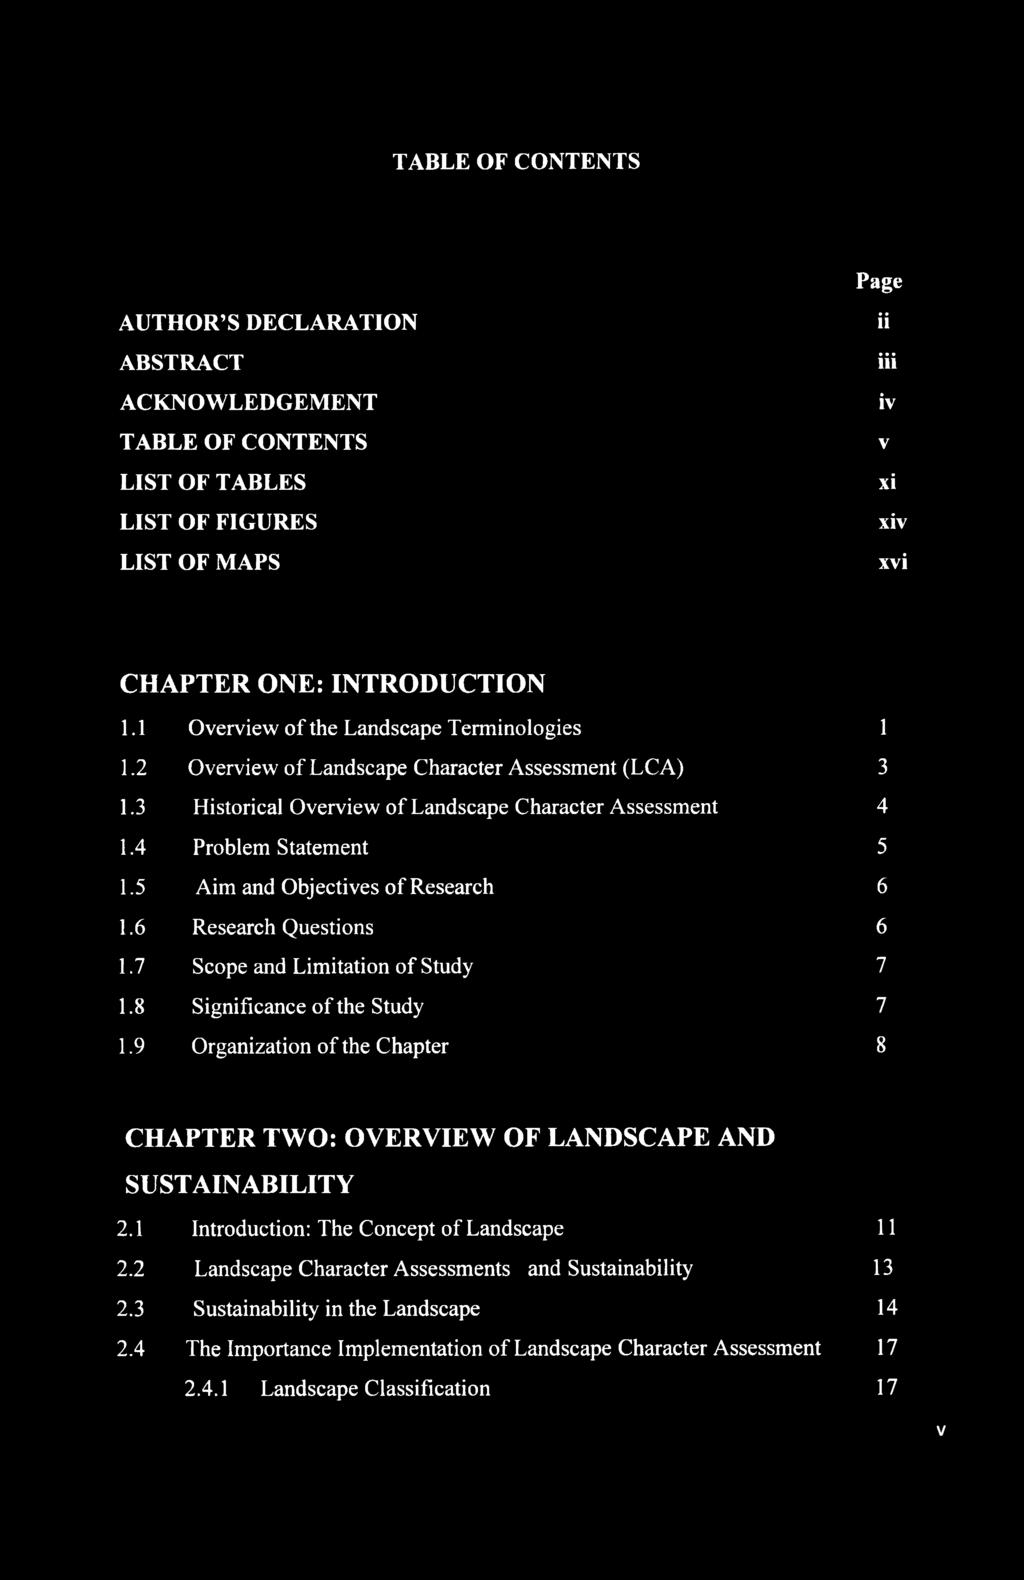 9 Organization of the Chapter 8 CHAPTER TWO: OVERVIEW OF LANDSCAPE AND SUSTAINABILITY 2.1 Introduction: The Concept of Landscape 11 2.